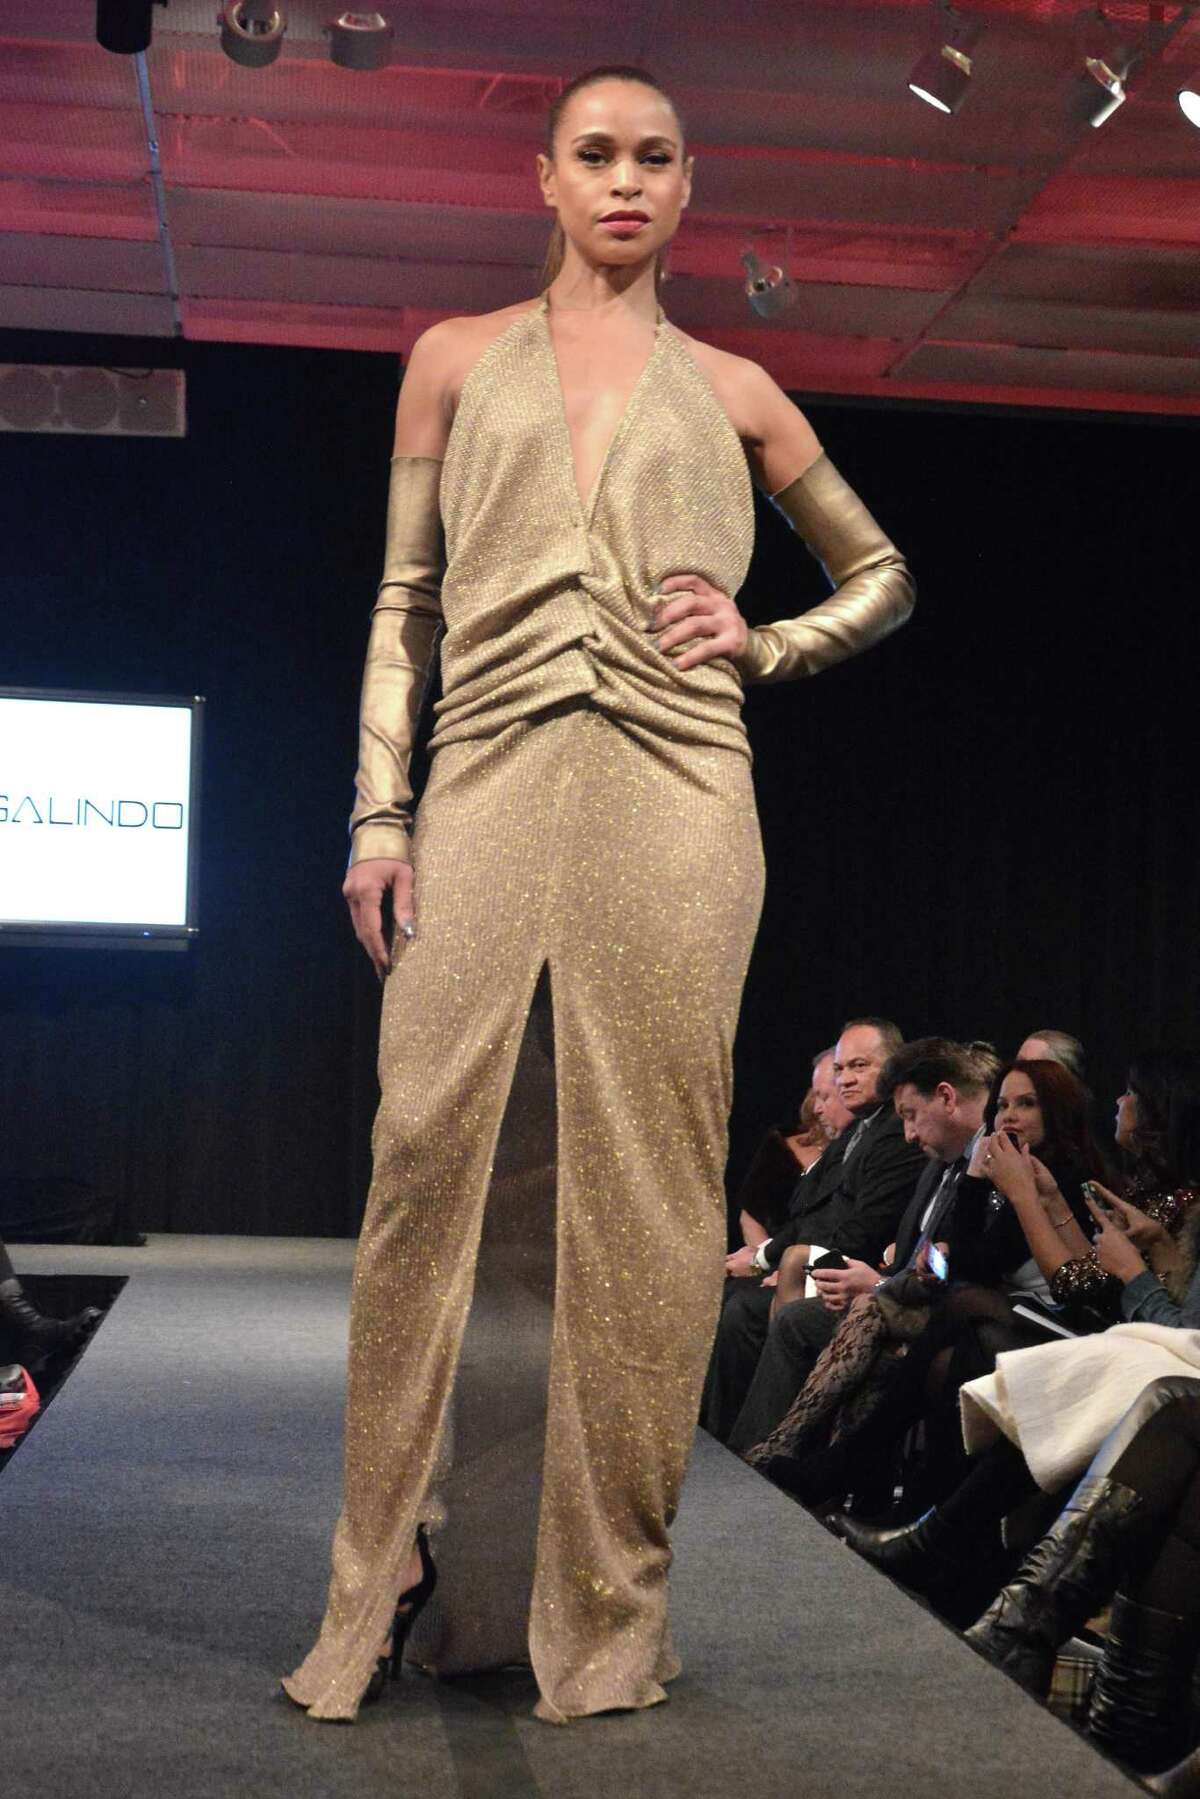 Sexy draping and modern shapes are signatures of Cesar Galindo’s glamorous designs for today’s woman. The Houston-born designer and New York Fashion Week regular is bringing his fall/winter 2015 collection, as seen in this look, in a free fashion show July 30 at San Antonio’s St. Anthony Hotel.